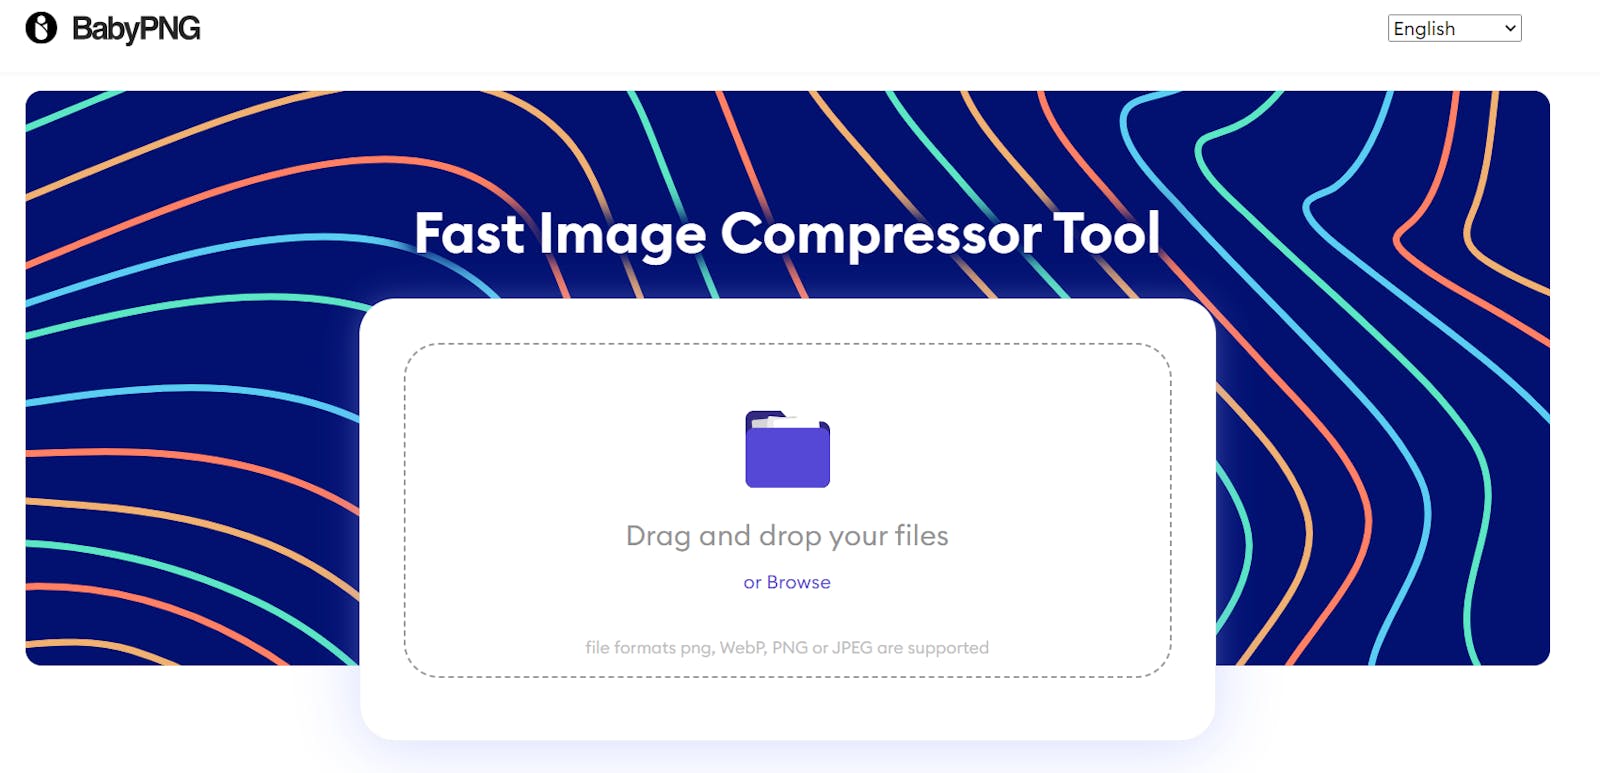 The Ultimate Guide to Online Image Compression: How to Reduce File Sizes Without Sacrificing Quality